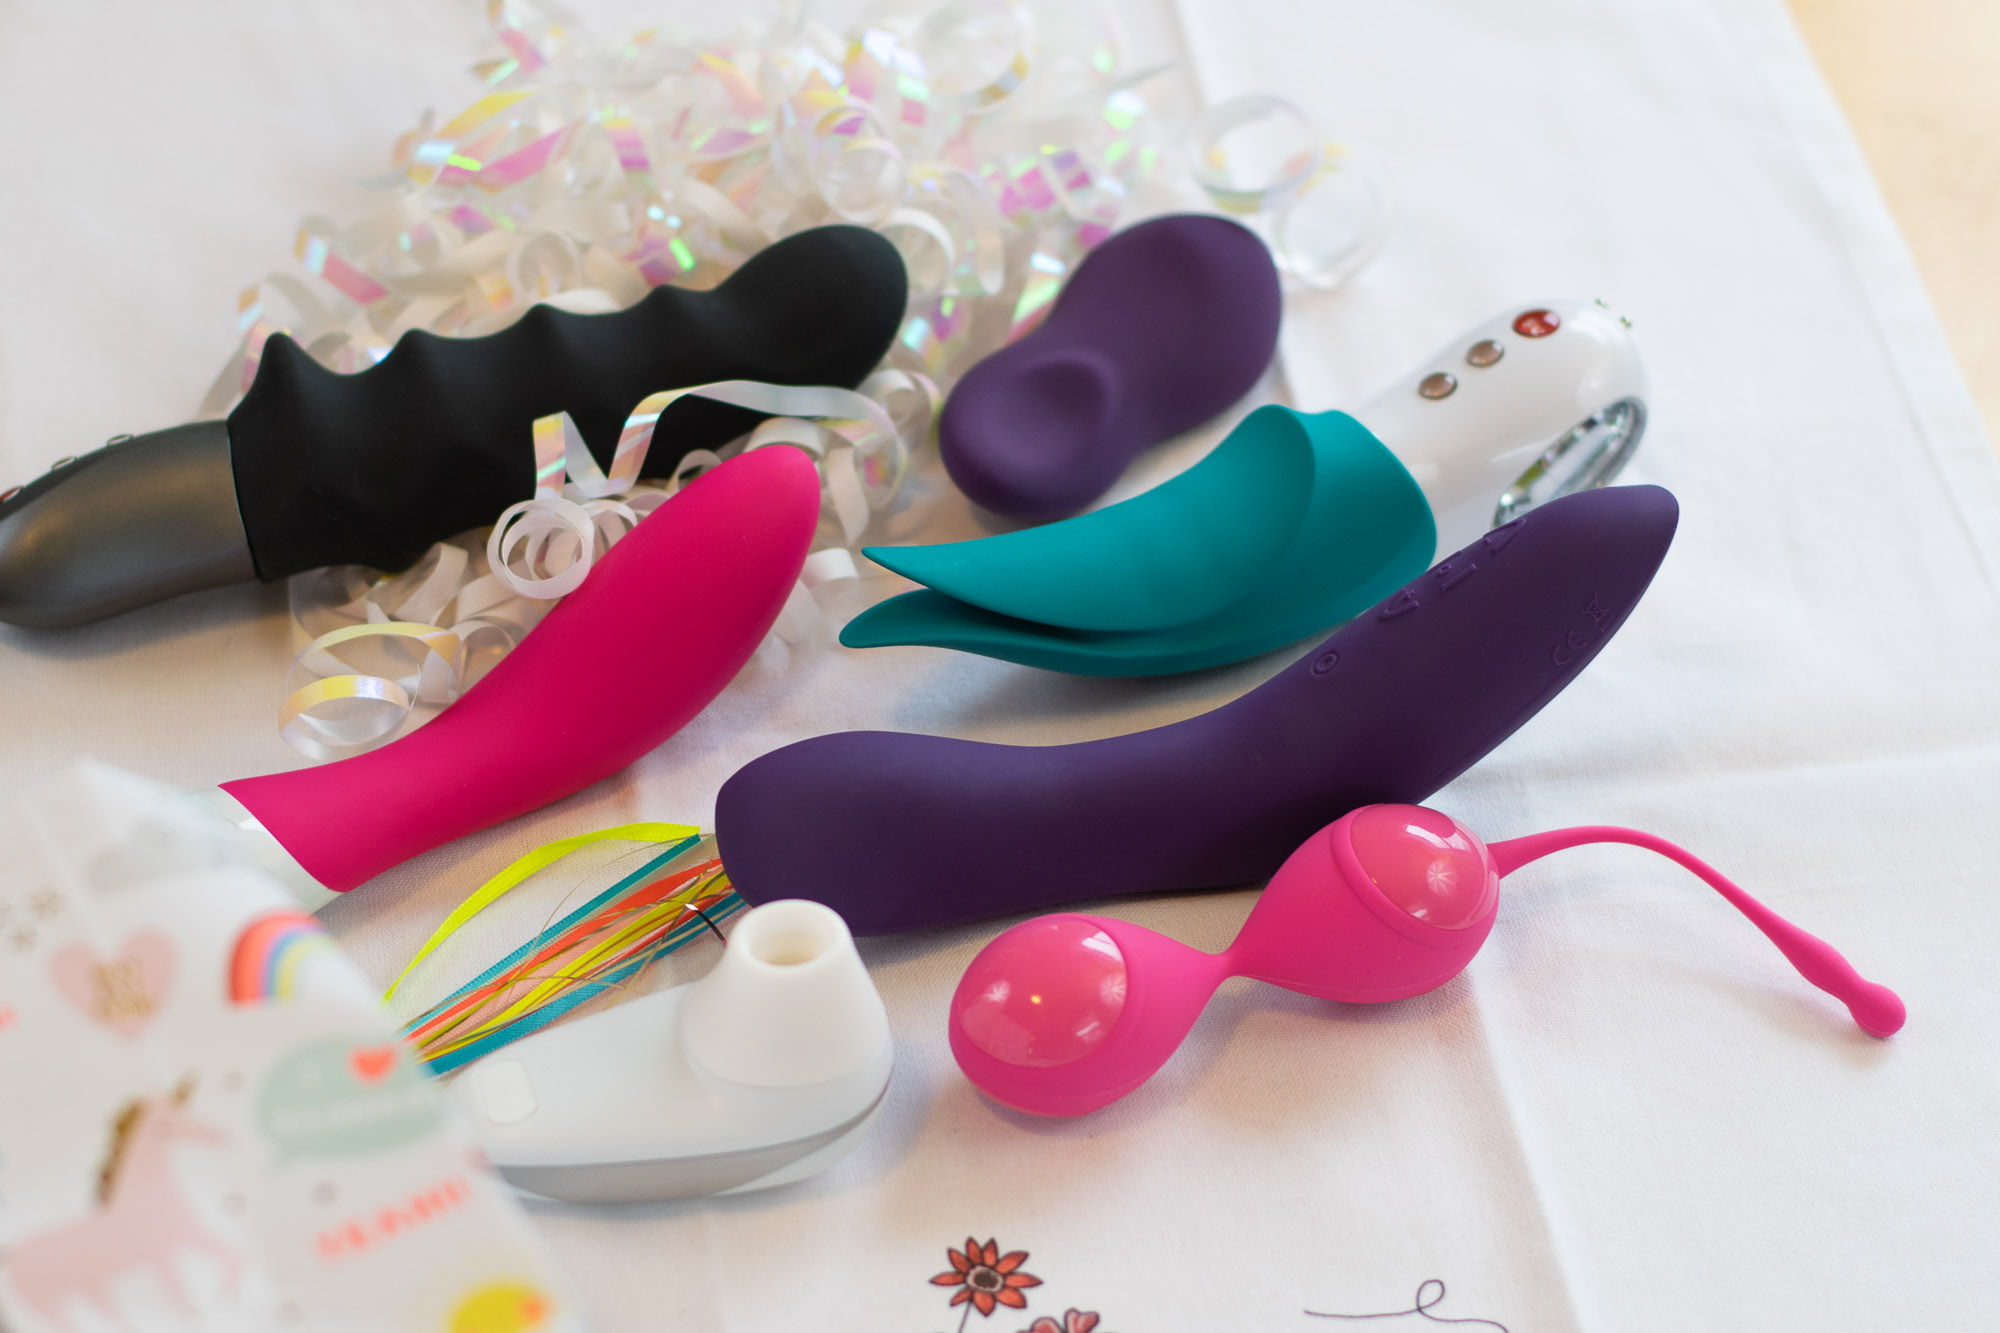 Epiphoras sex toy gift-giving guide » Hey Epiphora